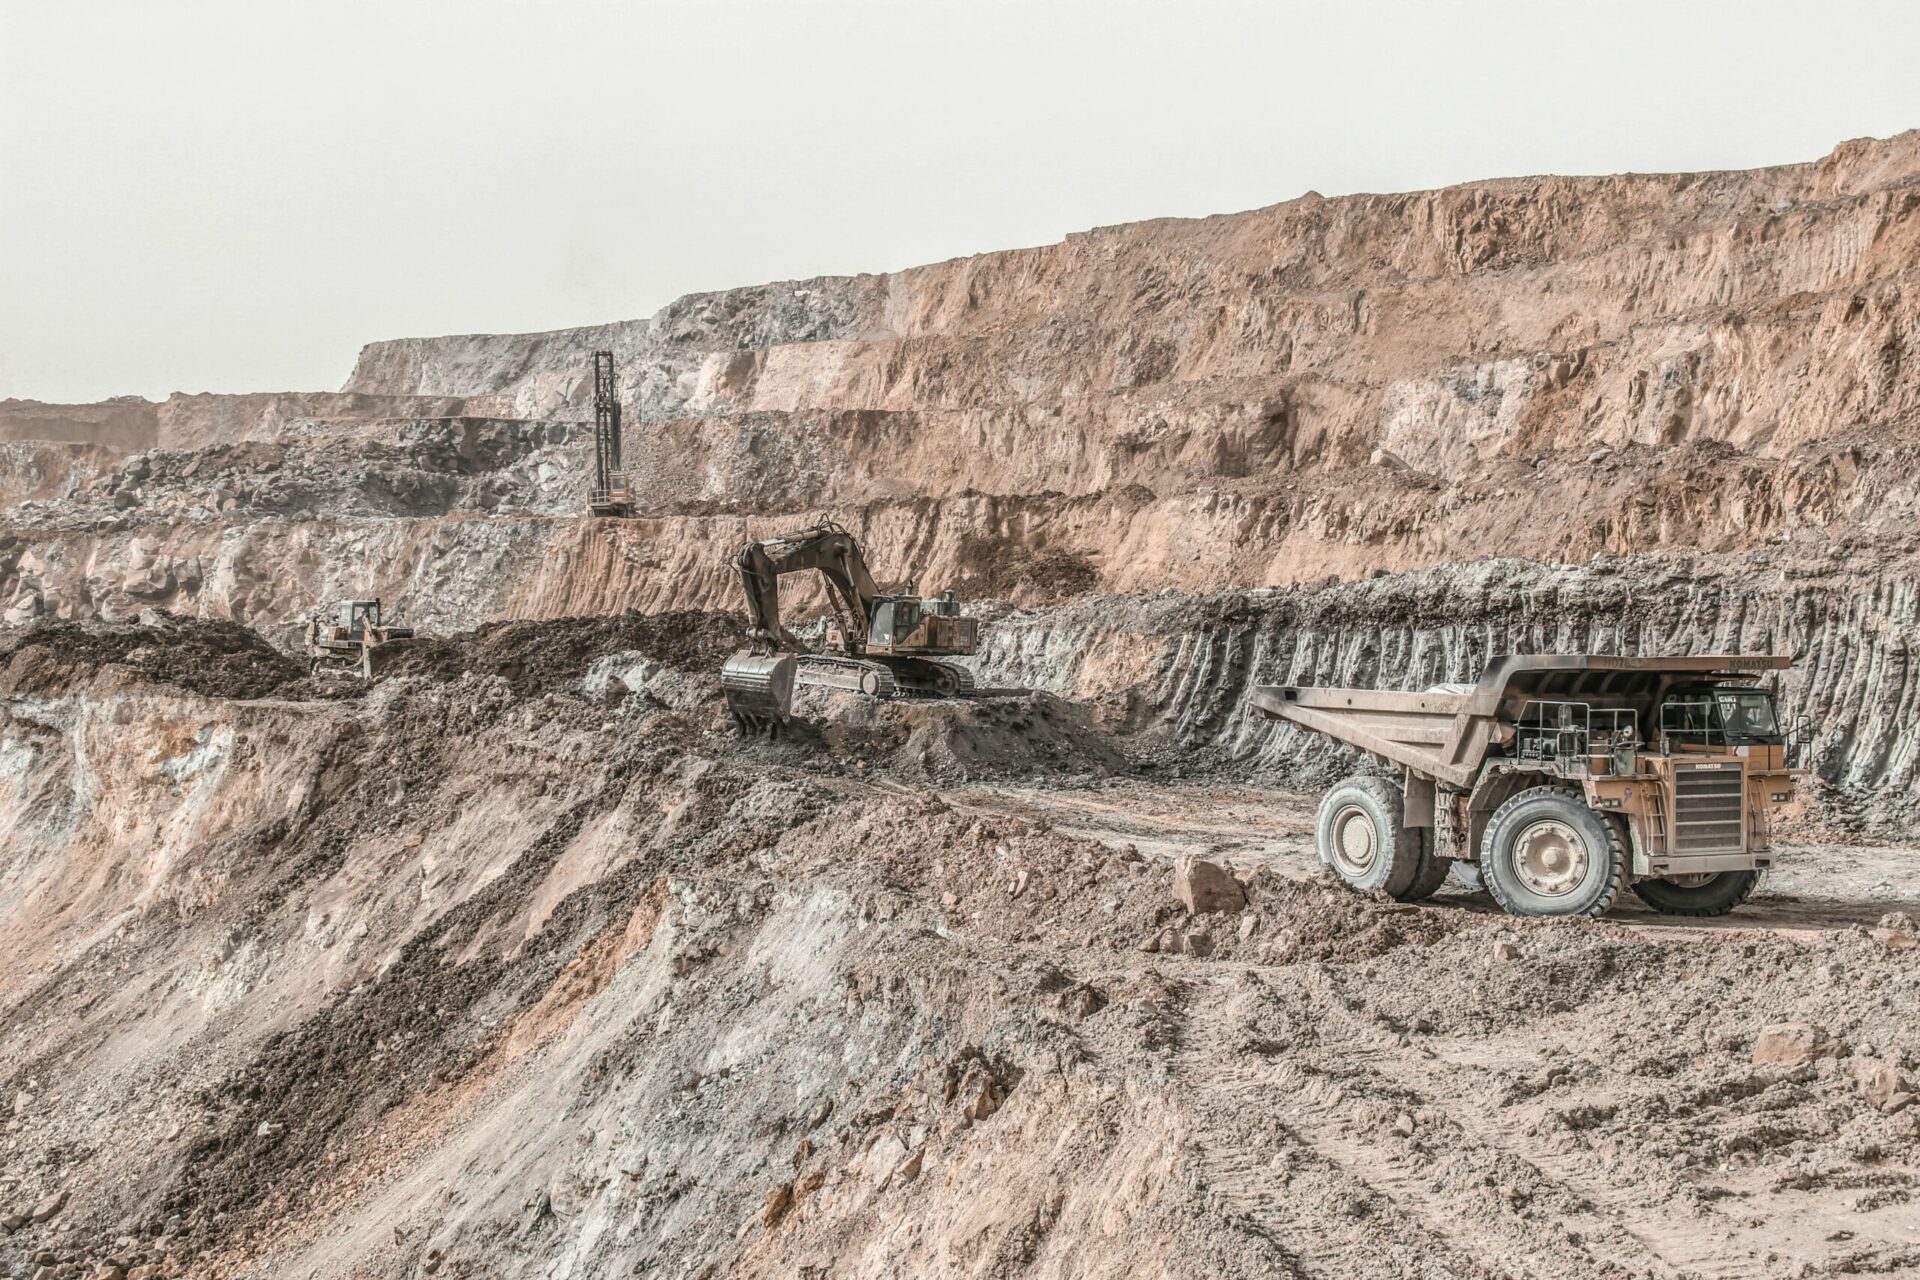 Mining vehicles in environment where localization sensors fail without GPR